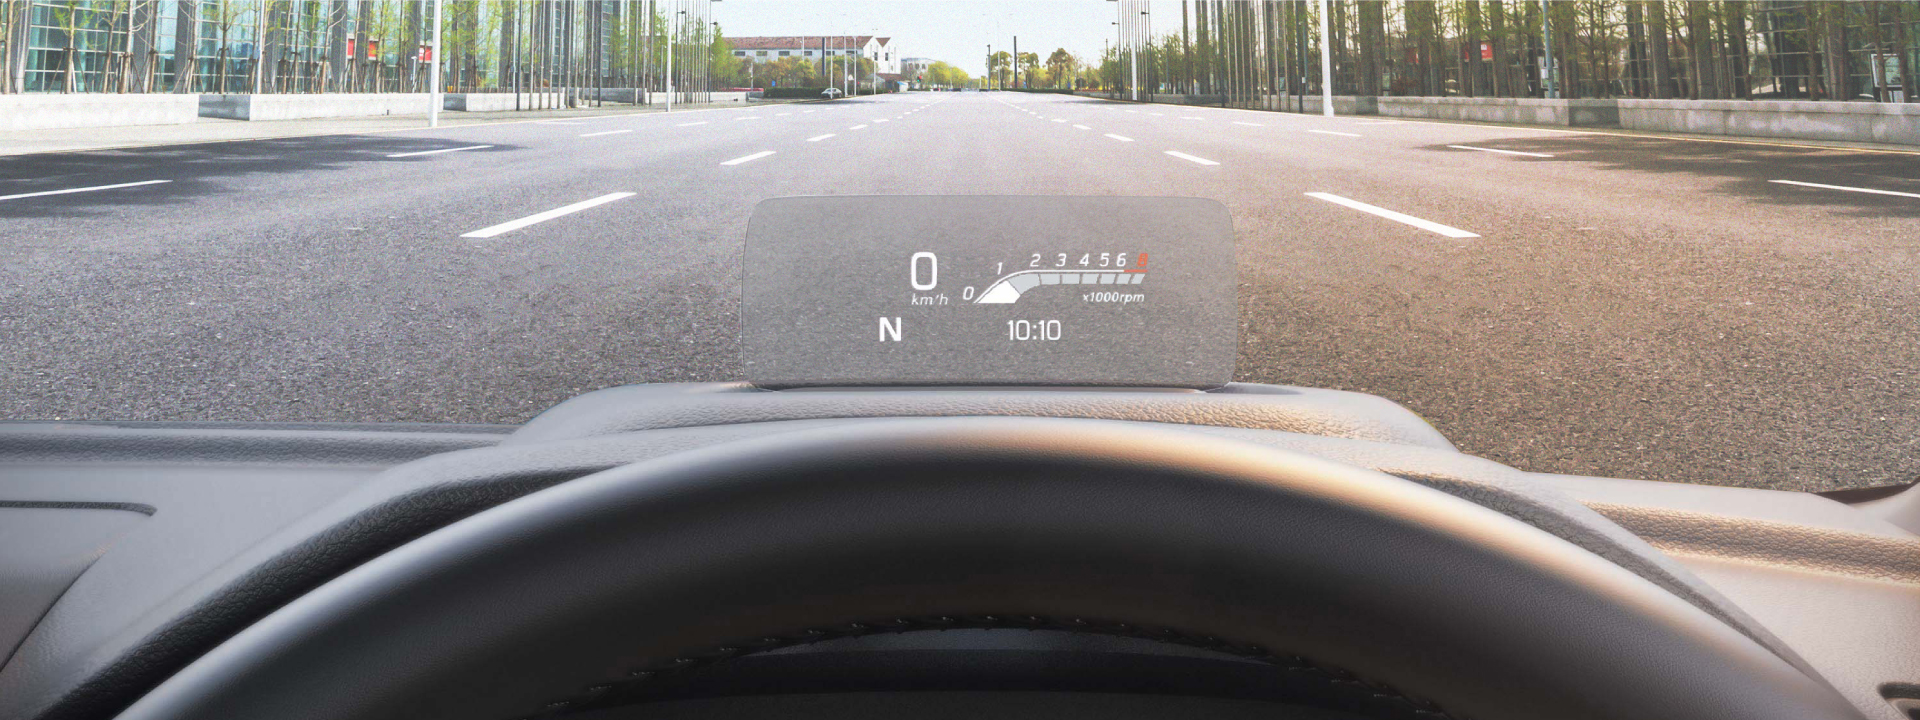 Is a head-up display worth it?